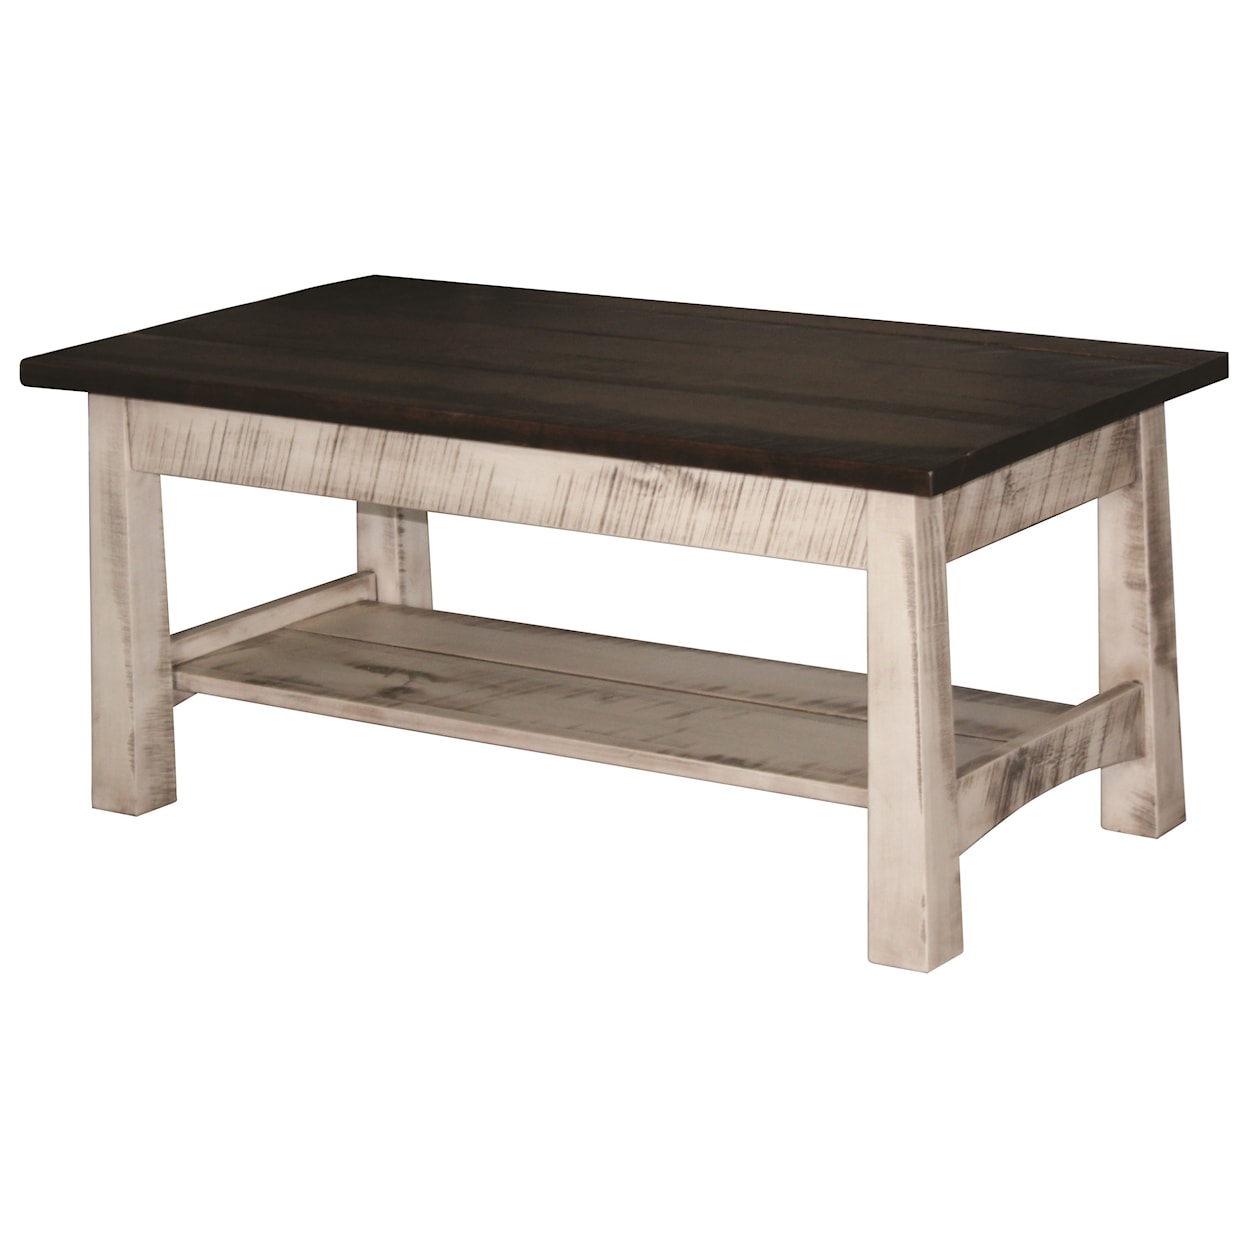 Ashery Woodworking Madison Rough Sawn Coffee Table